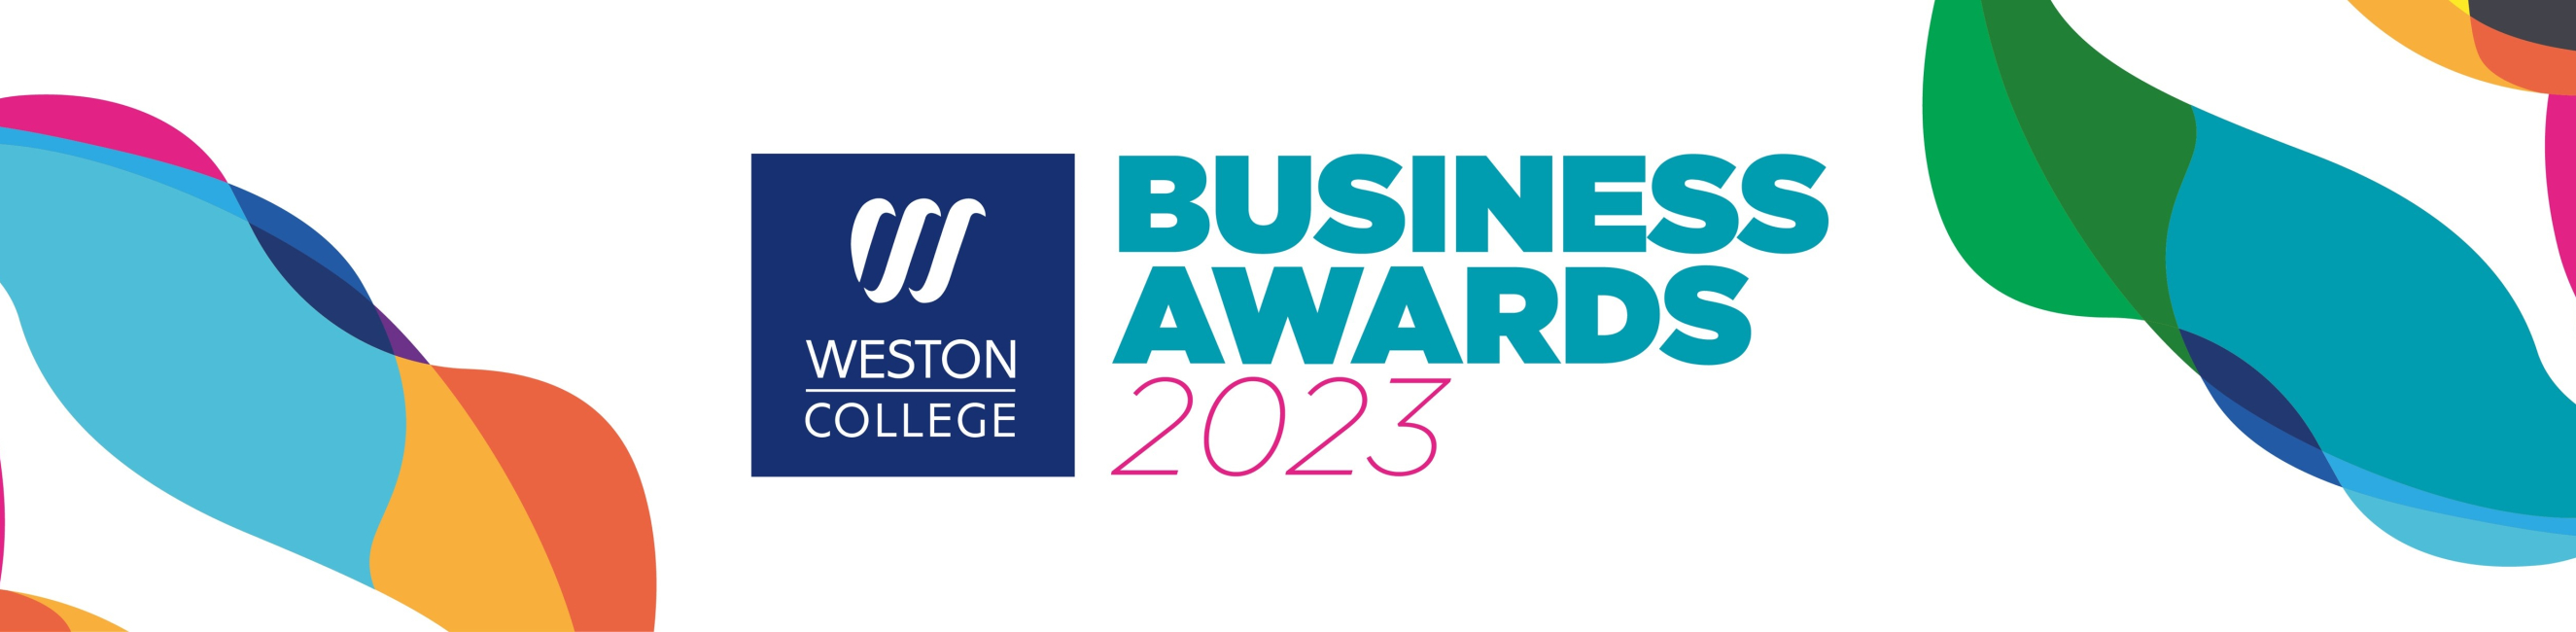 Weston College Business Awards 2023 graphic